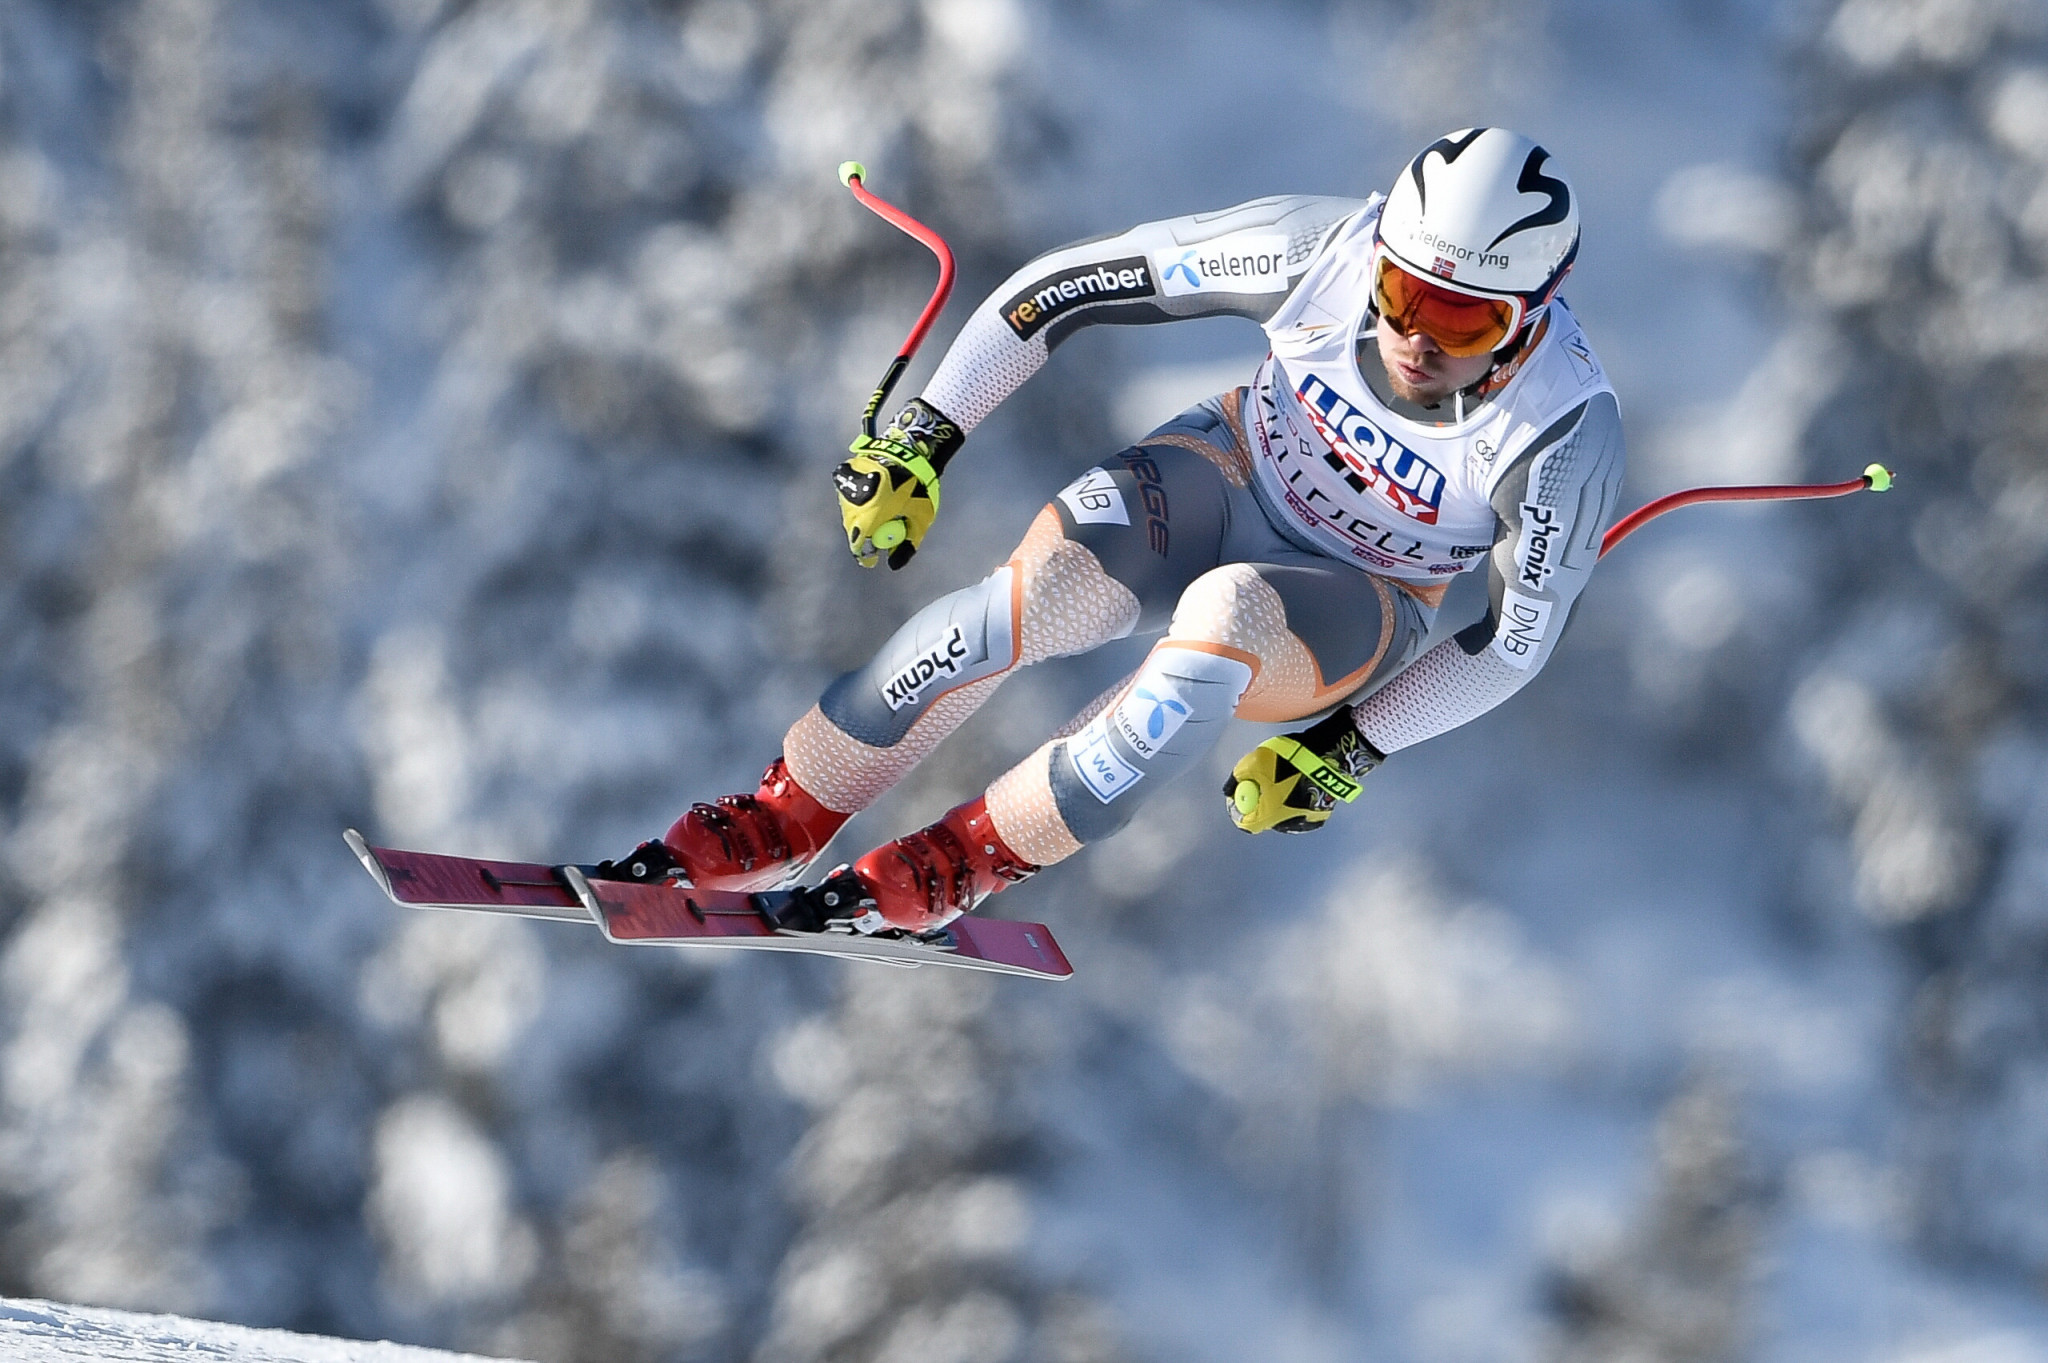 Aleksander Aamodt Kilde of Norway moved to the top of the FIS Alpine Ski World Cup standings ©Getty Images